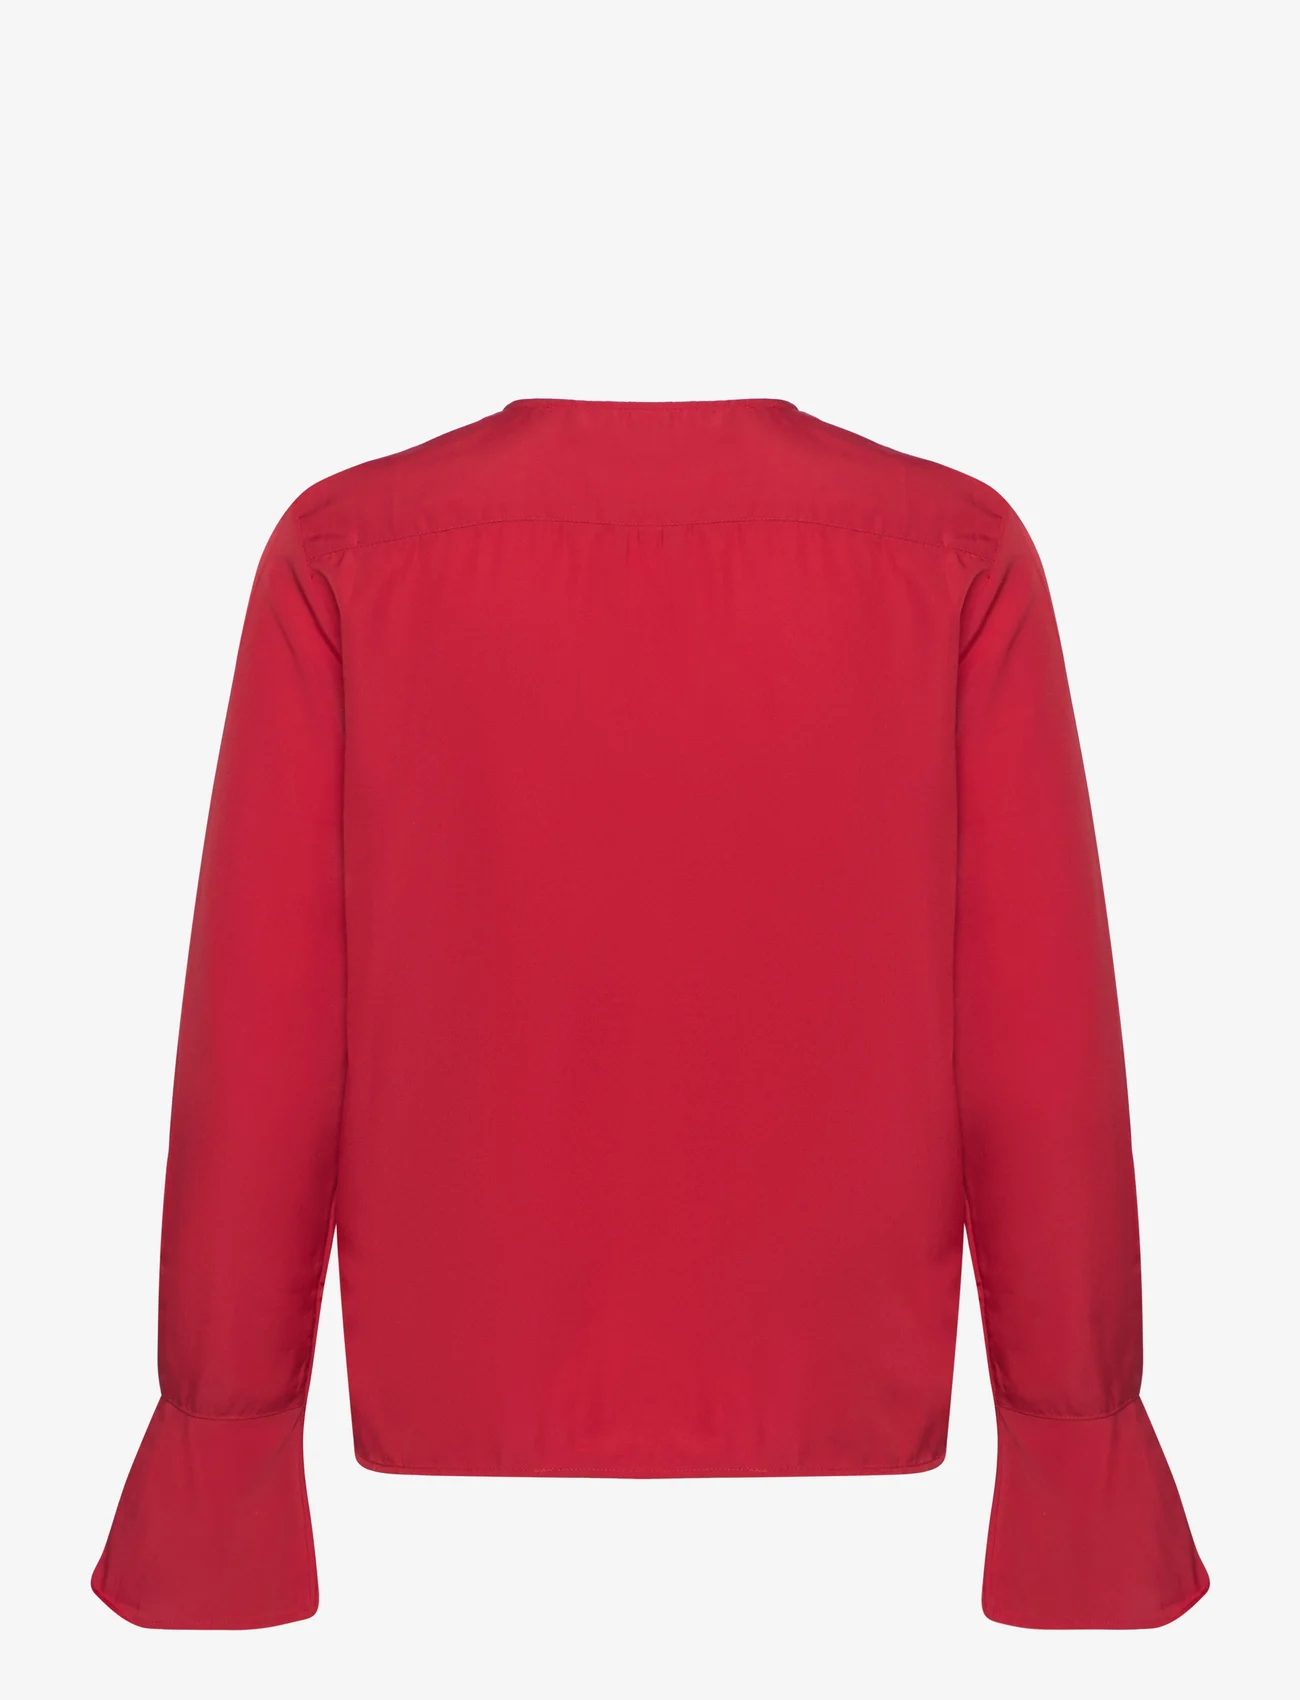 French Connection - CREPE LIGHT ASYMM FRILL SHIRT - langærmede bluser - warm red - 1